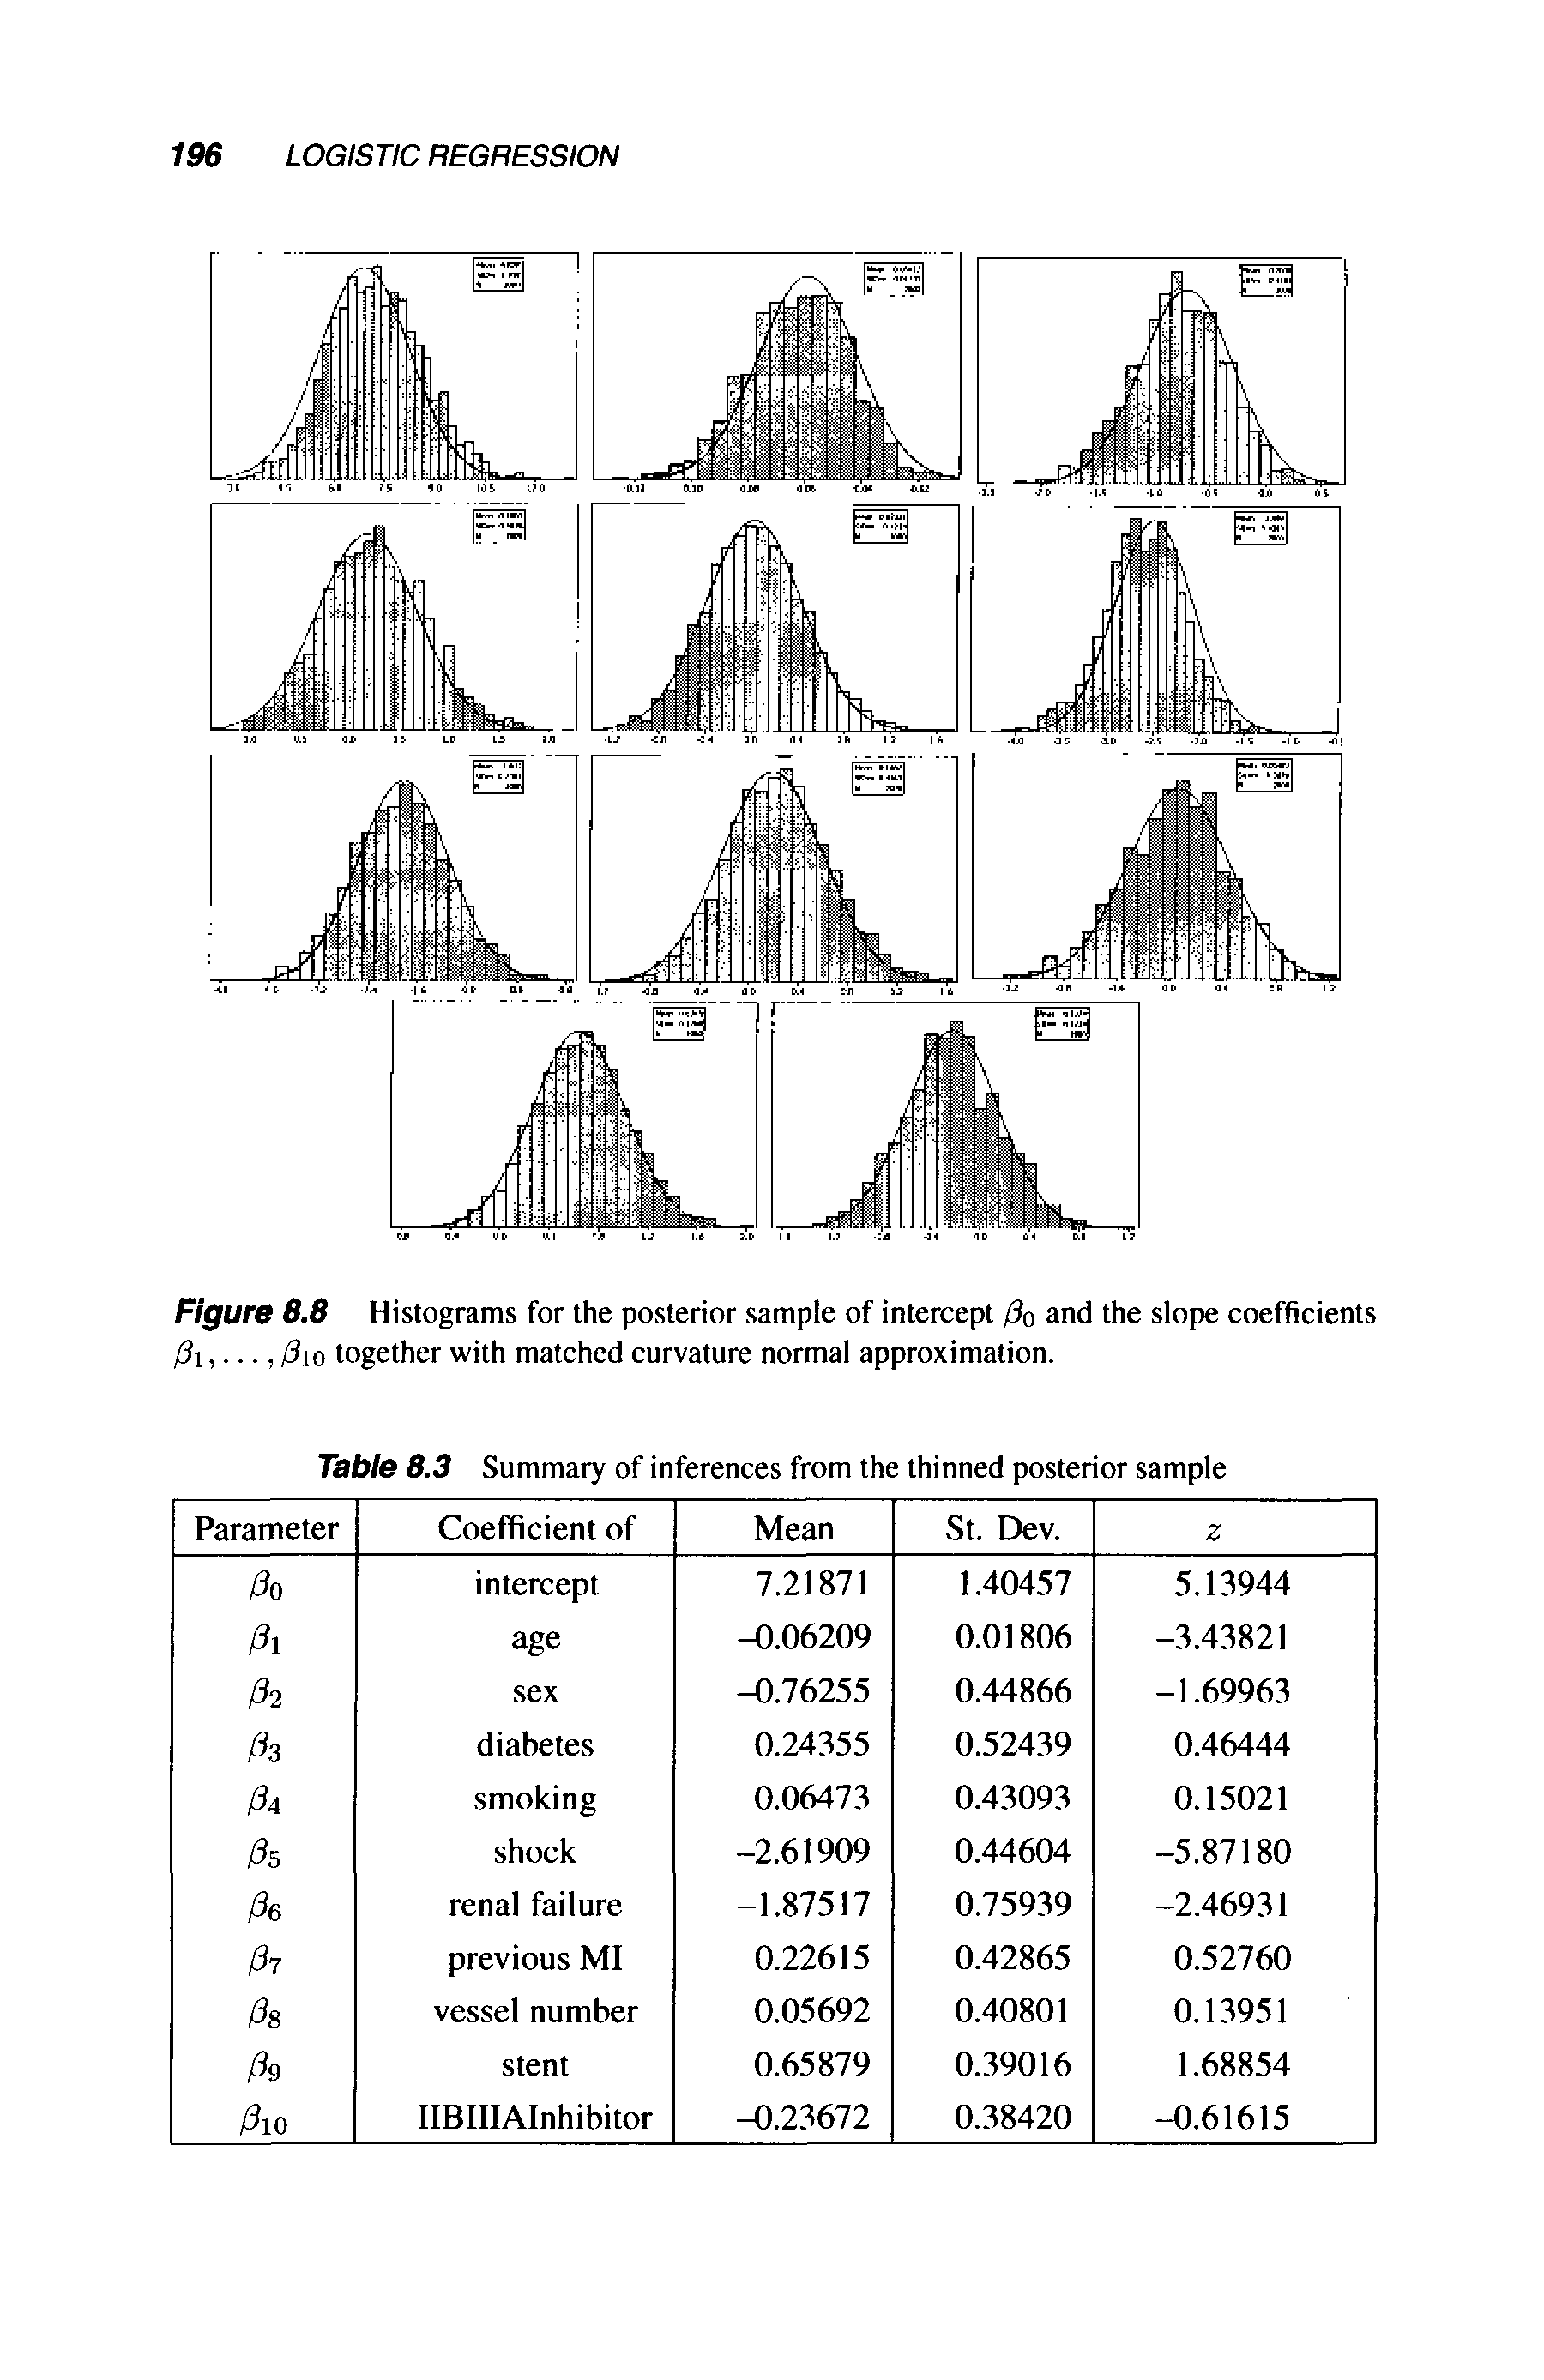 Figure 8.8 Histograms for the posterior sample of intercept 0o and the slope coefficients /3i,..., 010 together with matched curvature normal approximation.